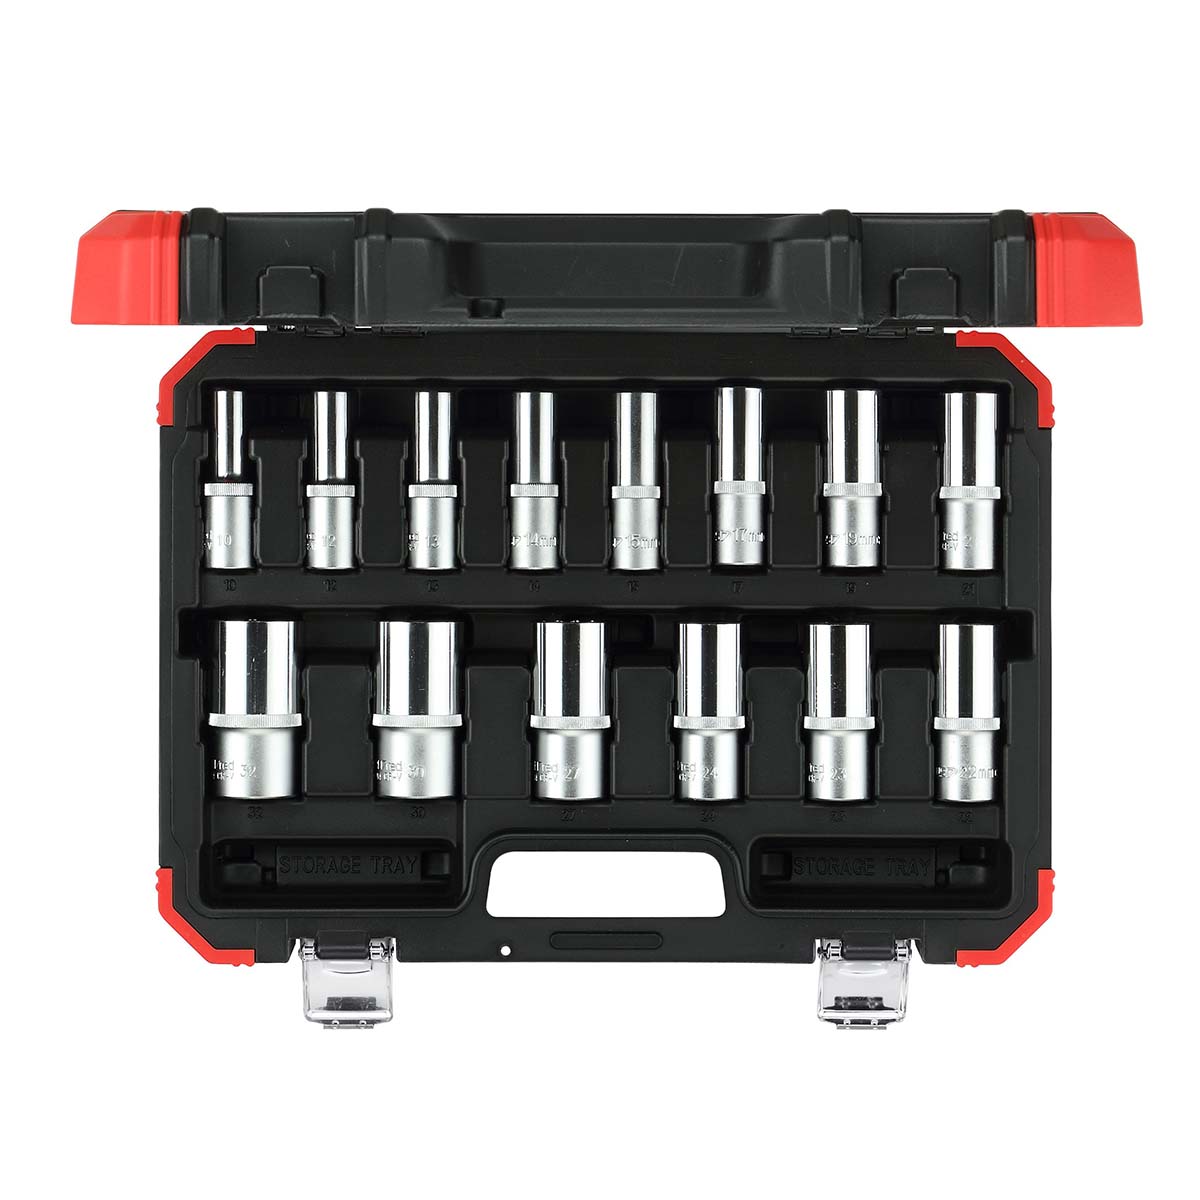 GEDORE red R61003114 - 1/2" hexagonal socket wrench set 10-32 mm, 14 pieces (3300008)